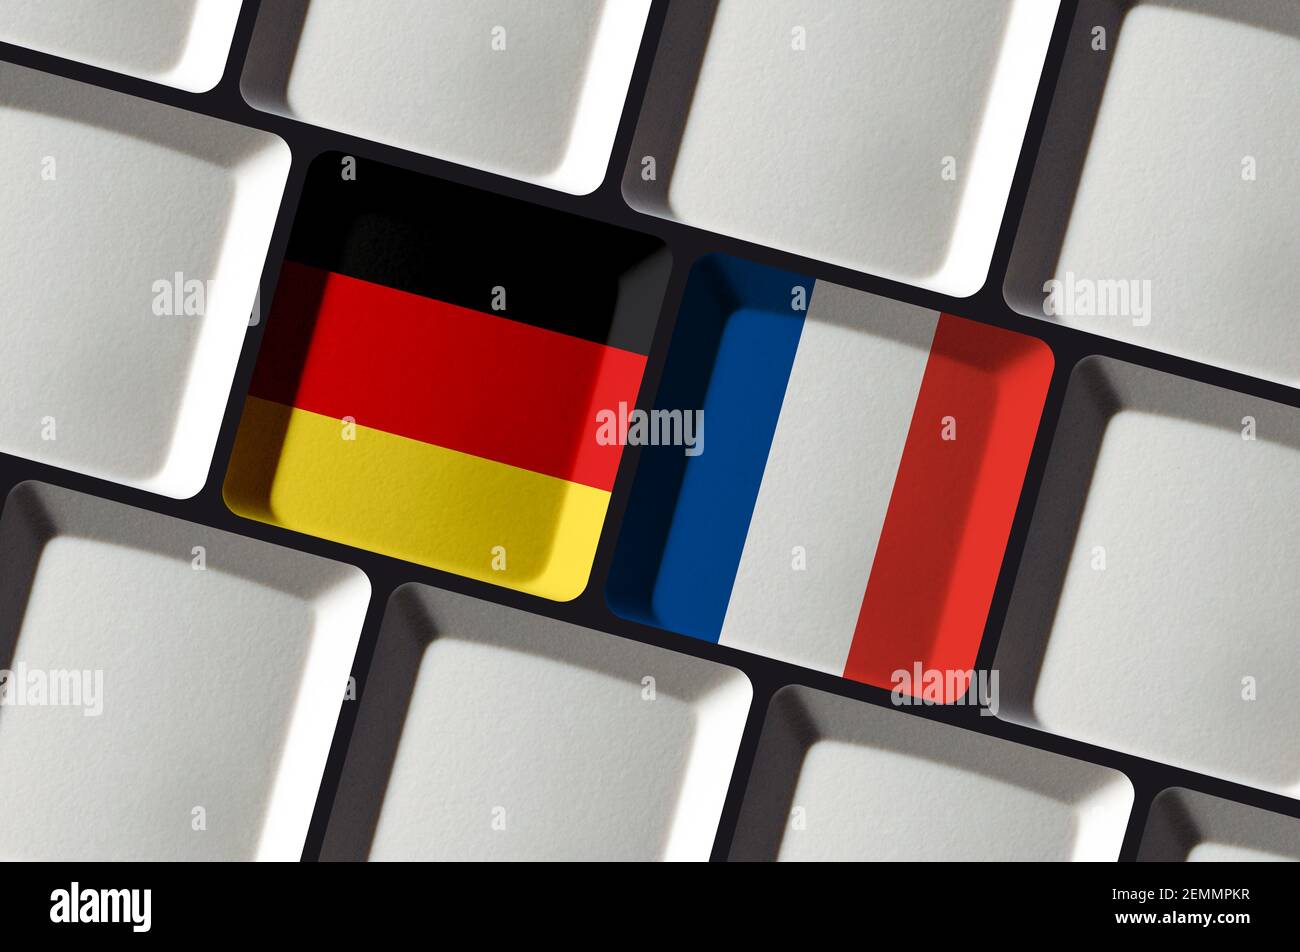 Keyboard with German and French flag bilateral language learning and translation Stock Photo